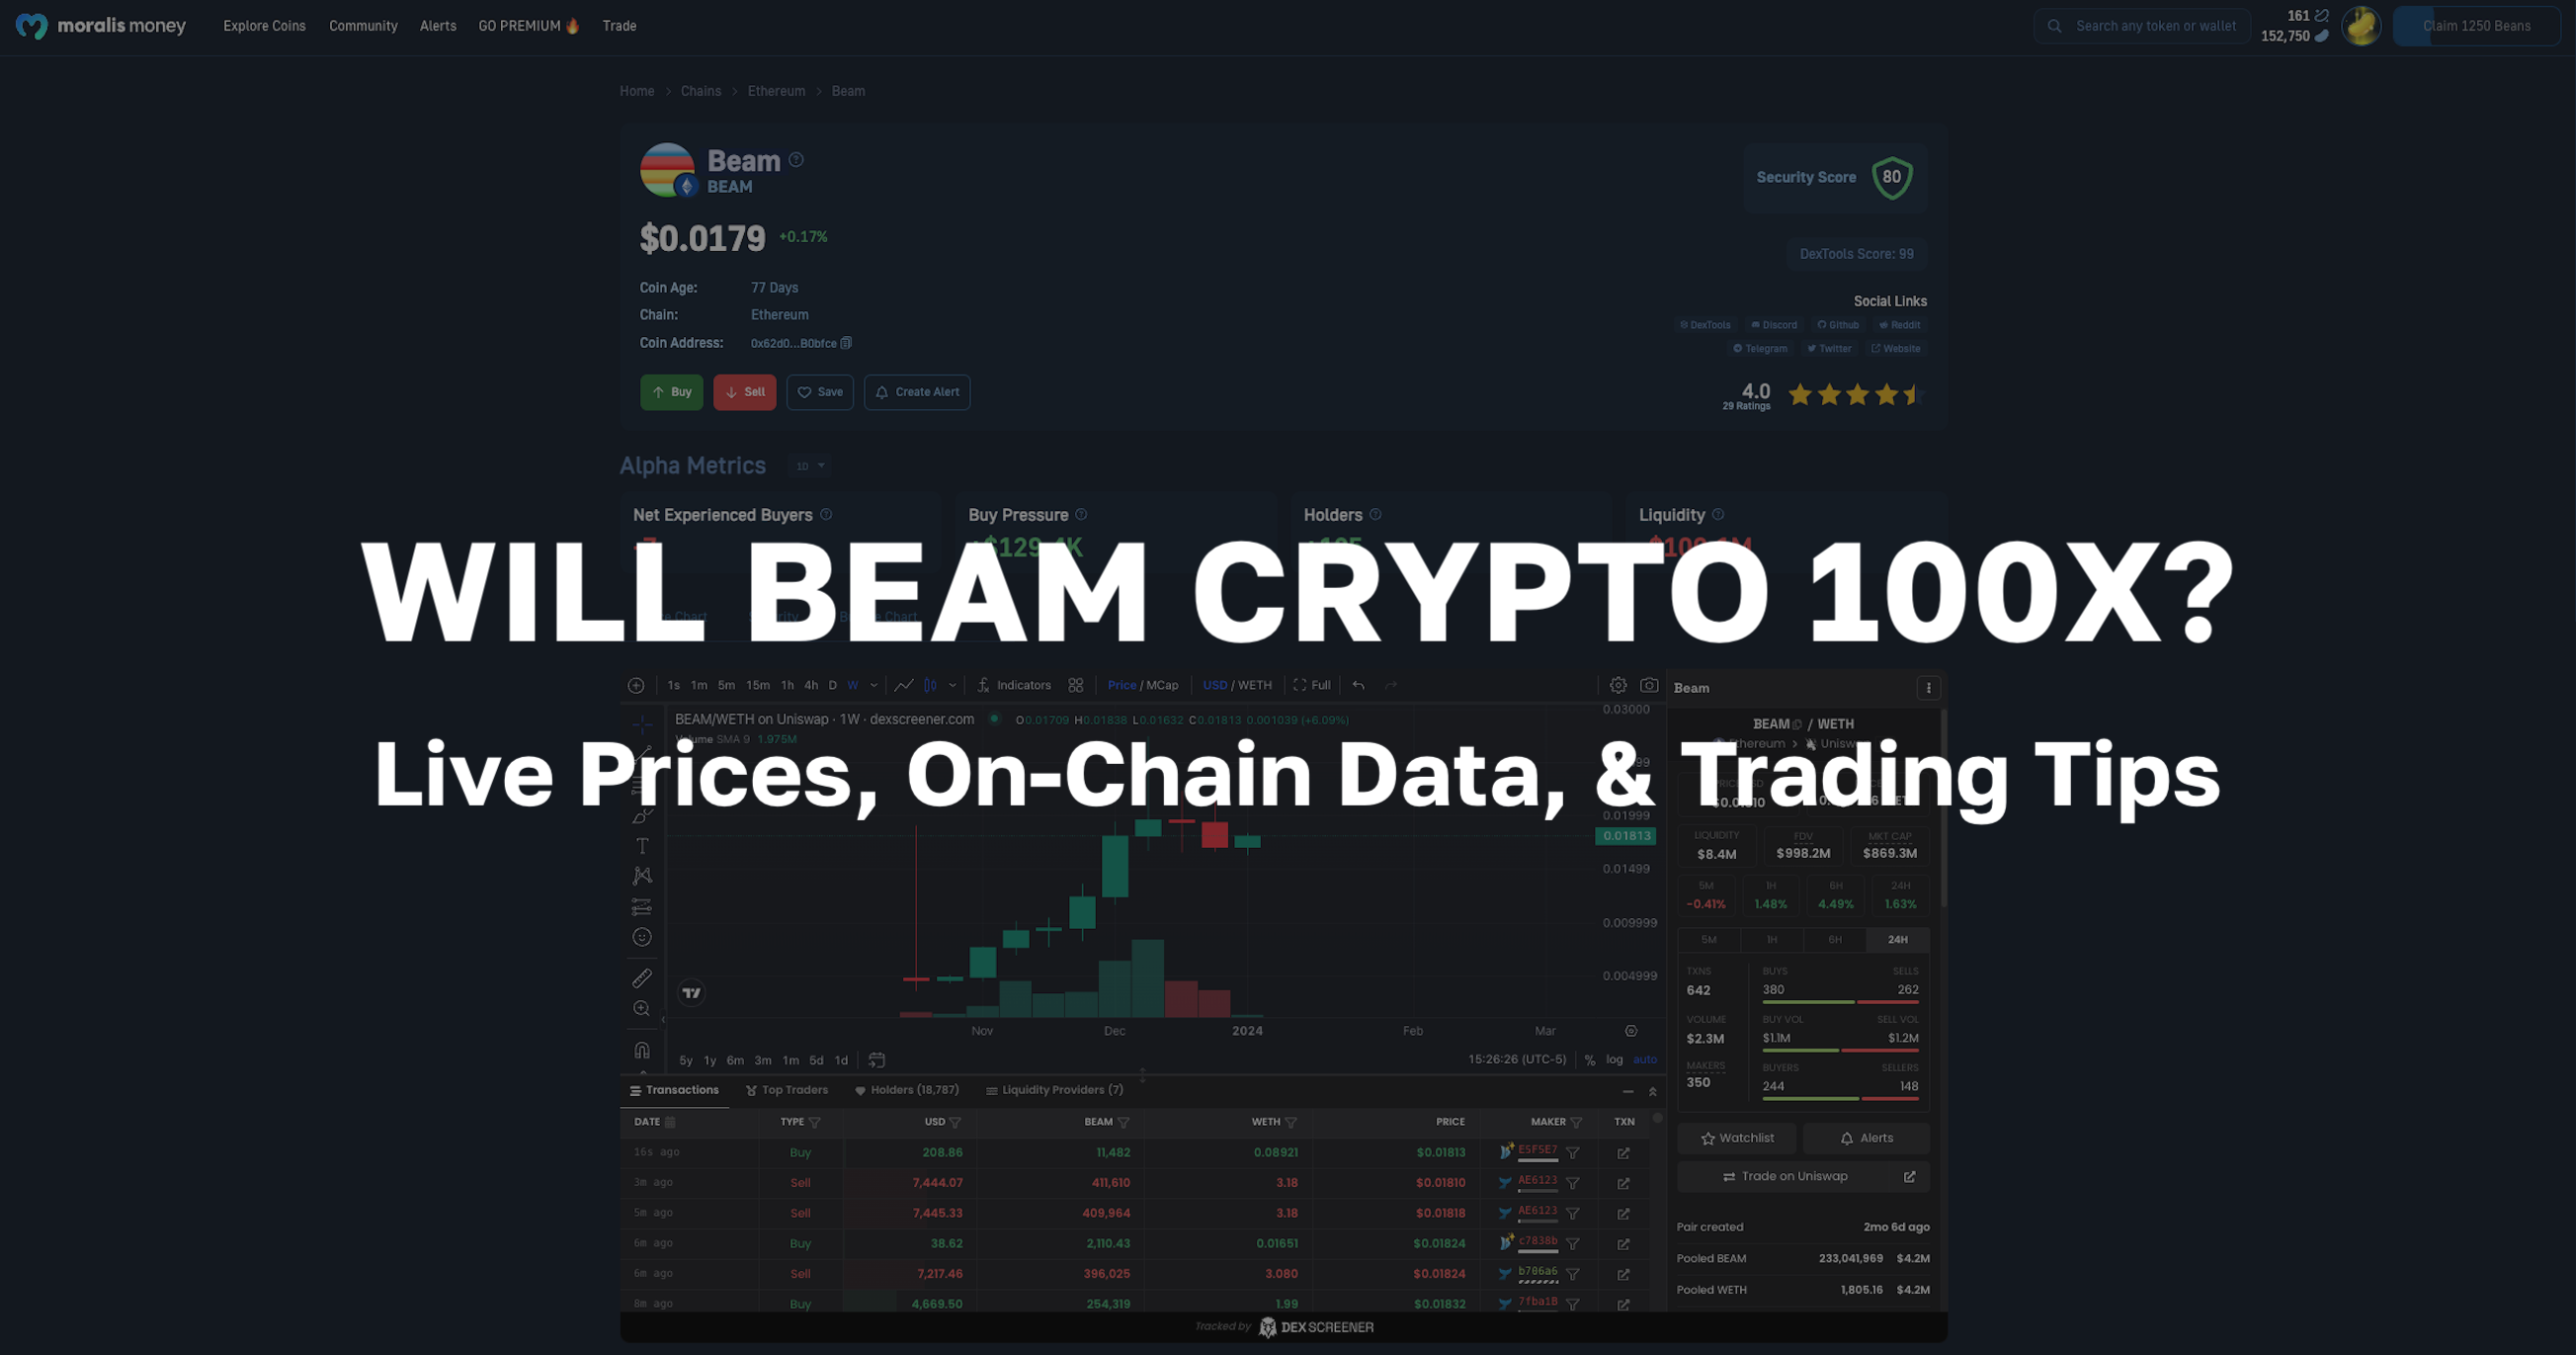 Will BEAM Crypto 100x? Live Prices, On-Chain Data and Trading Tips